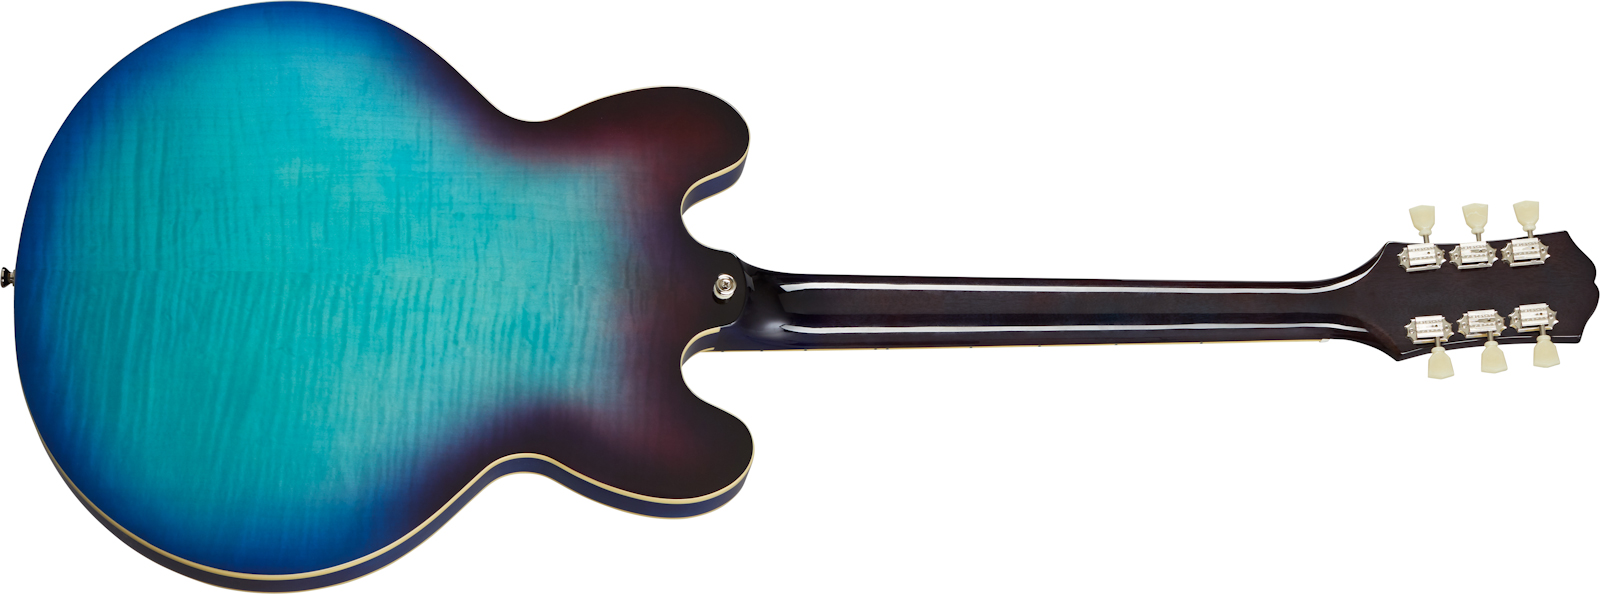 Epiphone Es-335 Figured Inspired By Gibson Original 2h Ht Rw - Blueberry Burst - Semi-hollow electric guitar - Variation 1